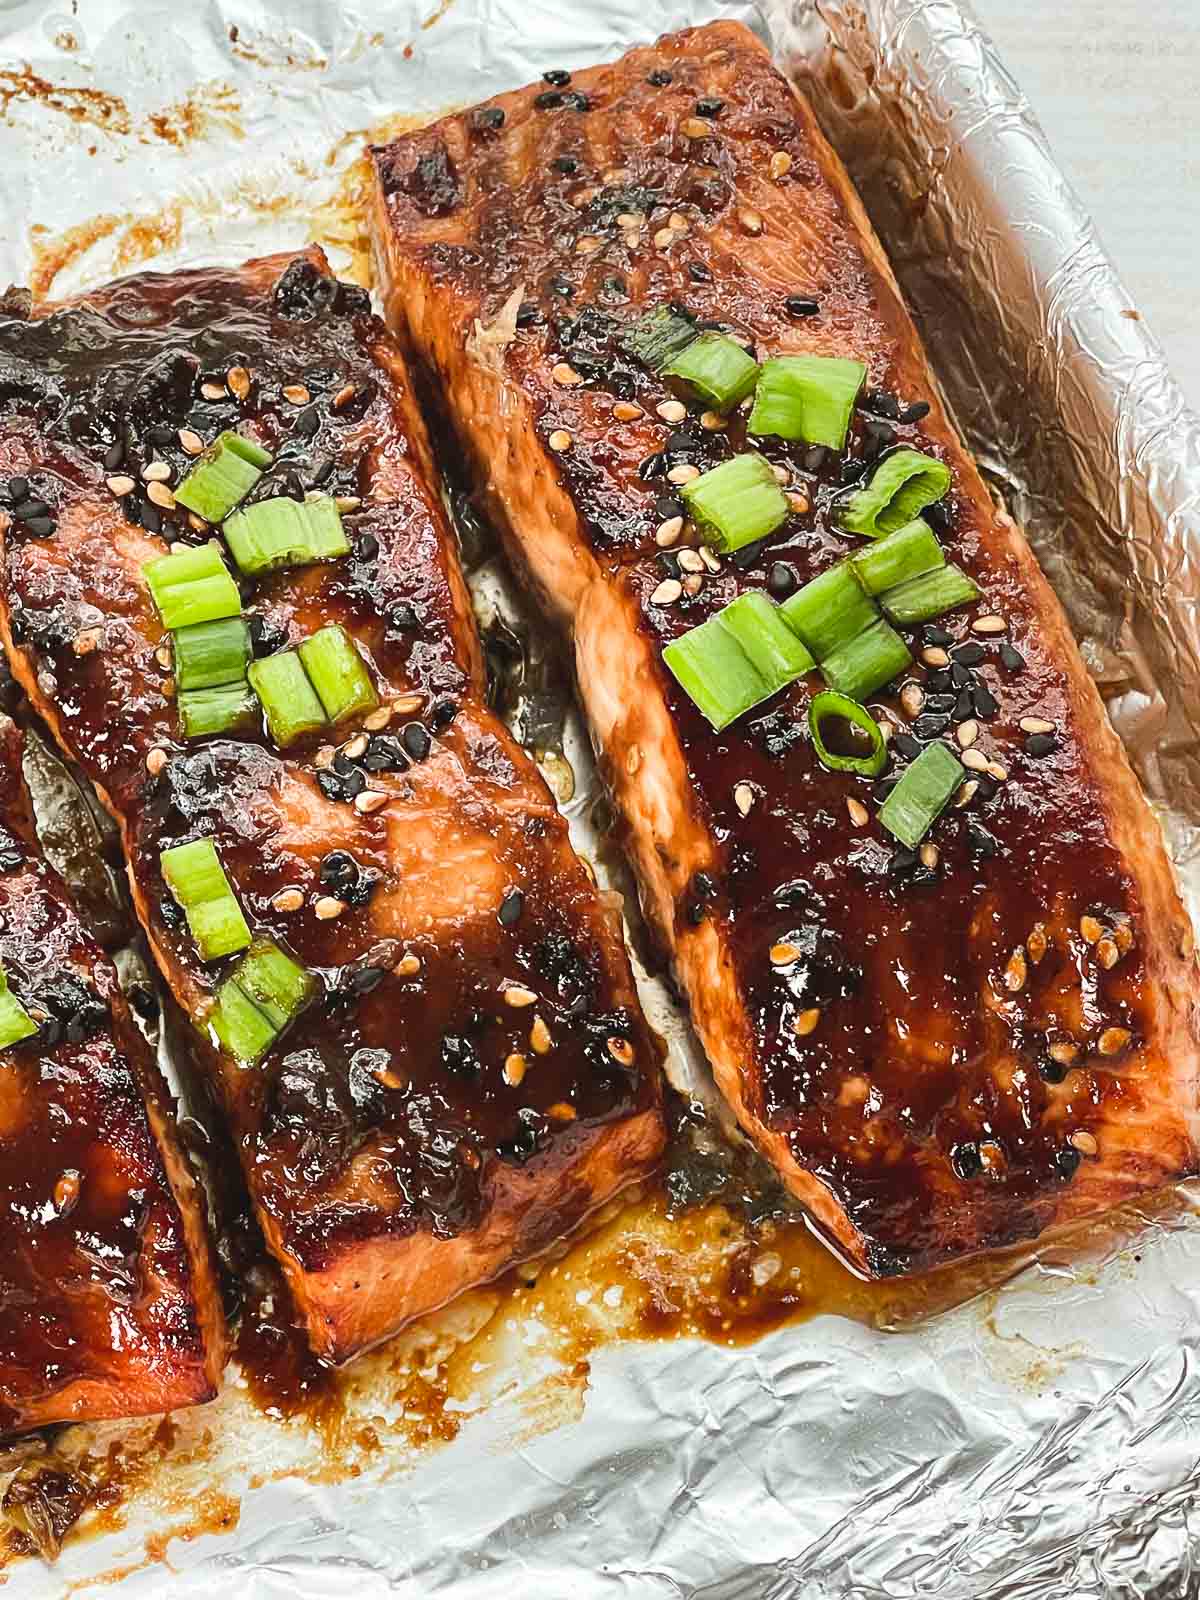 Broiled miso glazed salmon filets topped with chopped green onions on a baking sheet lined with foil.